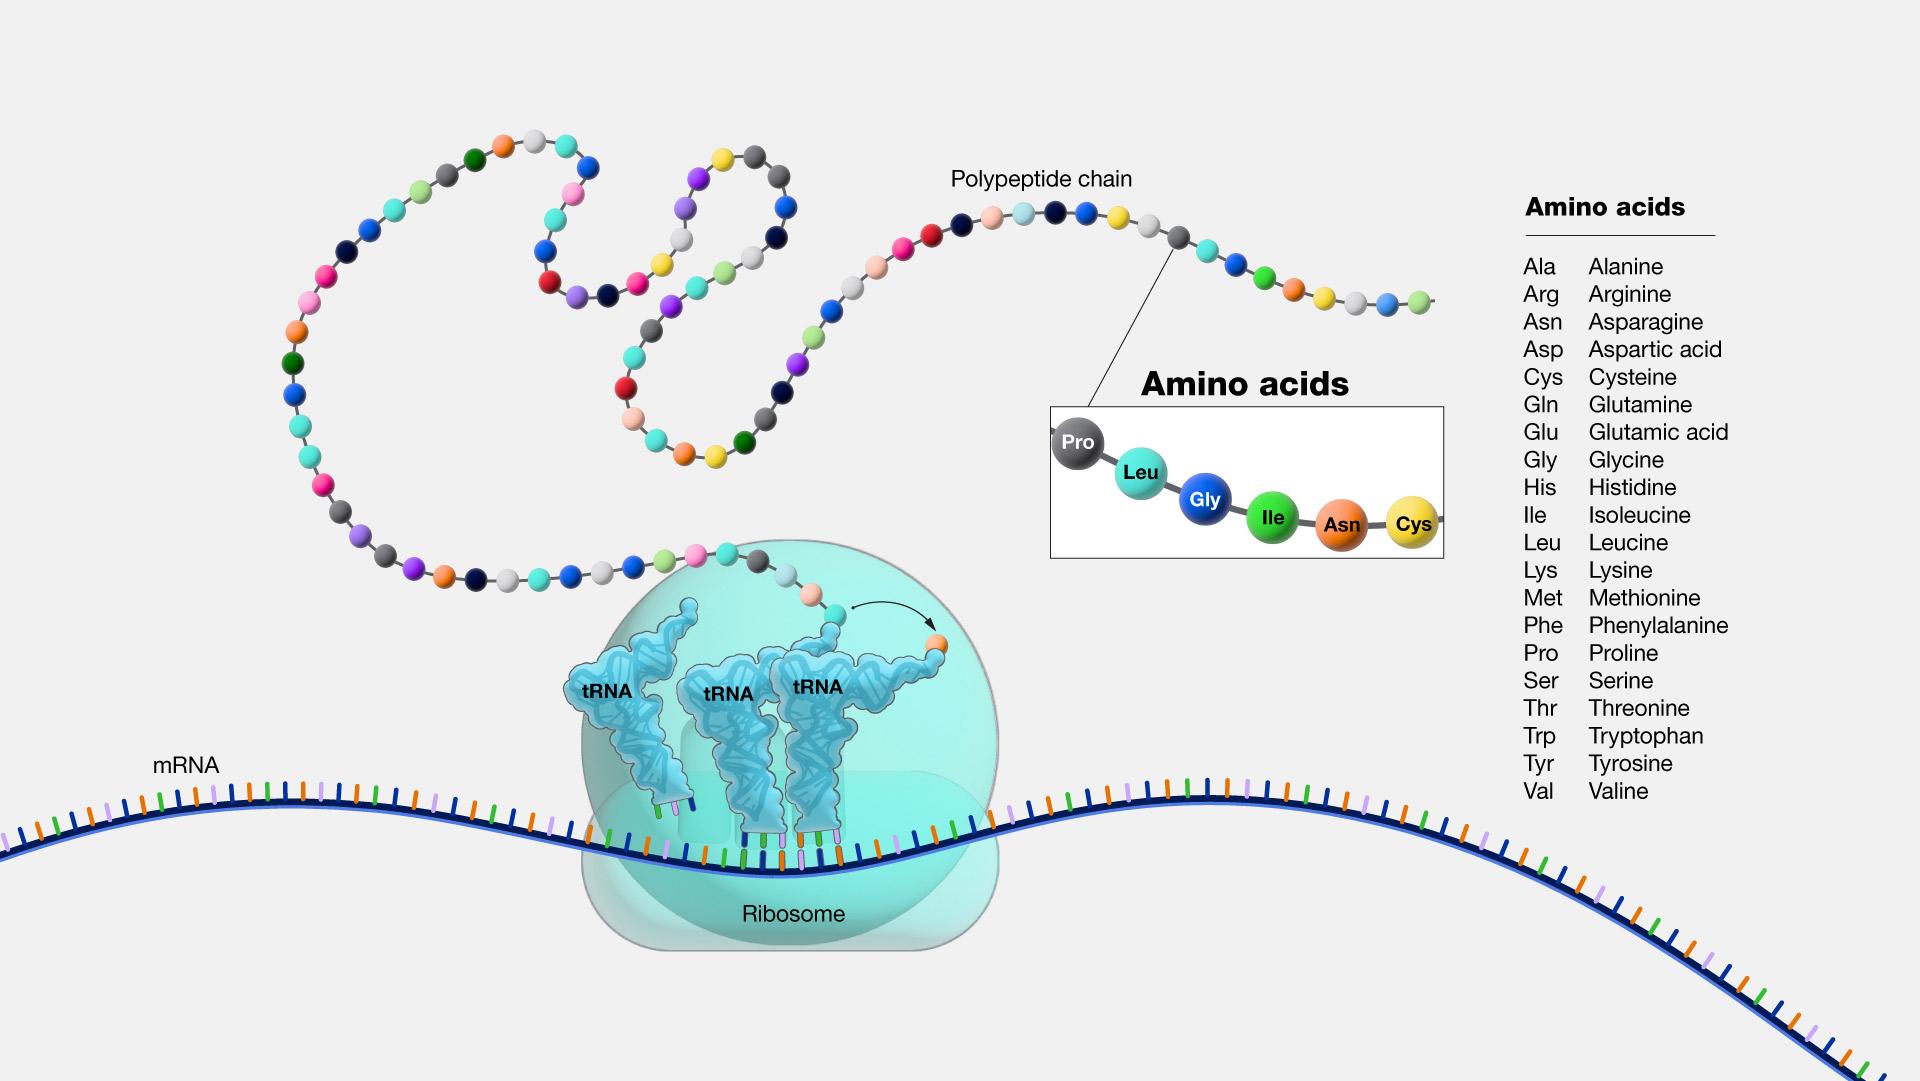 Ribosome and tRNA read mRNA and help join amino acids to a growing polypeptide chain.